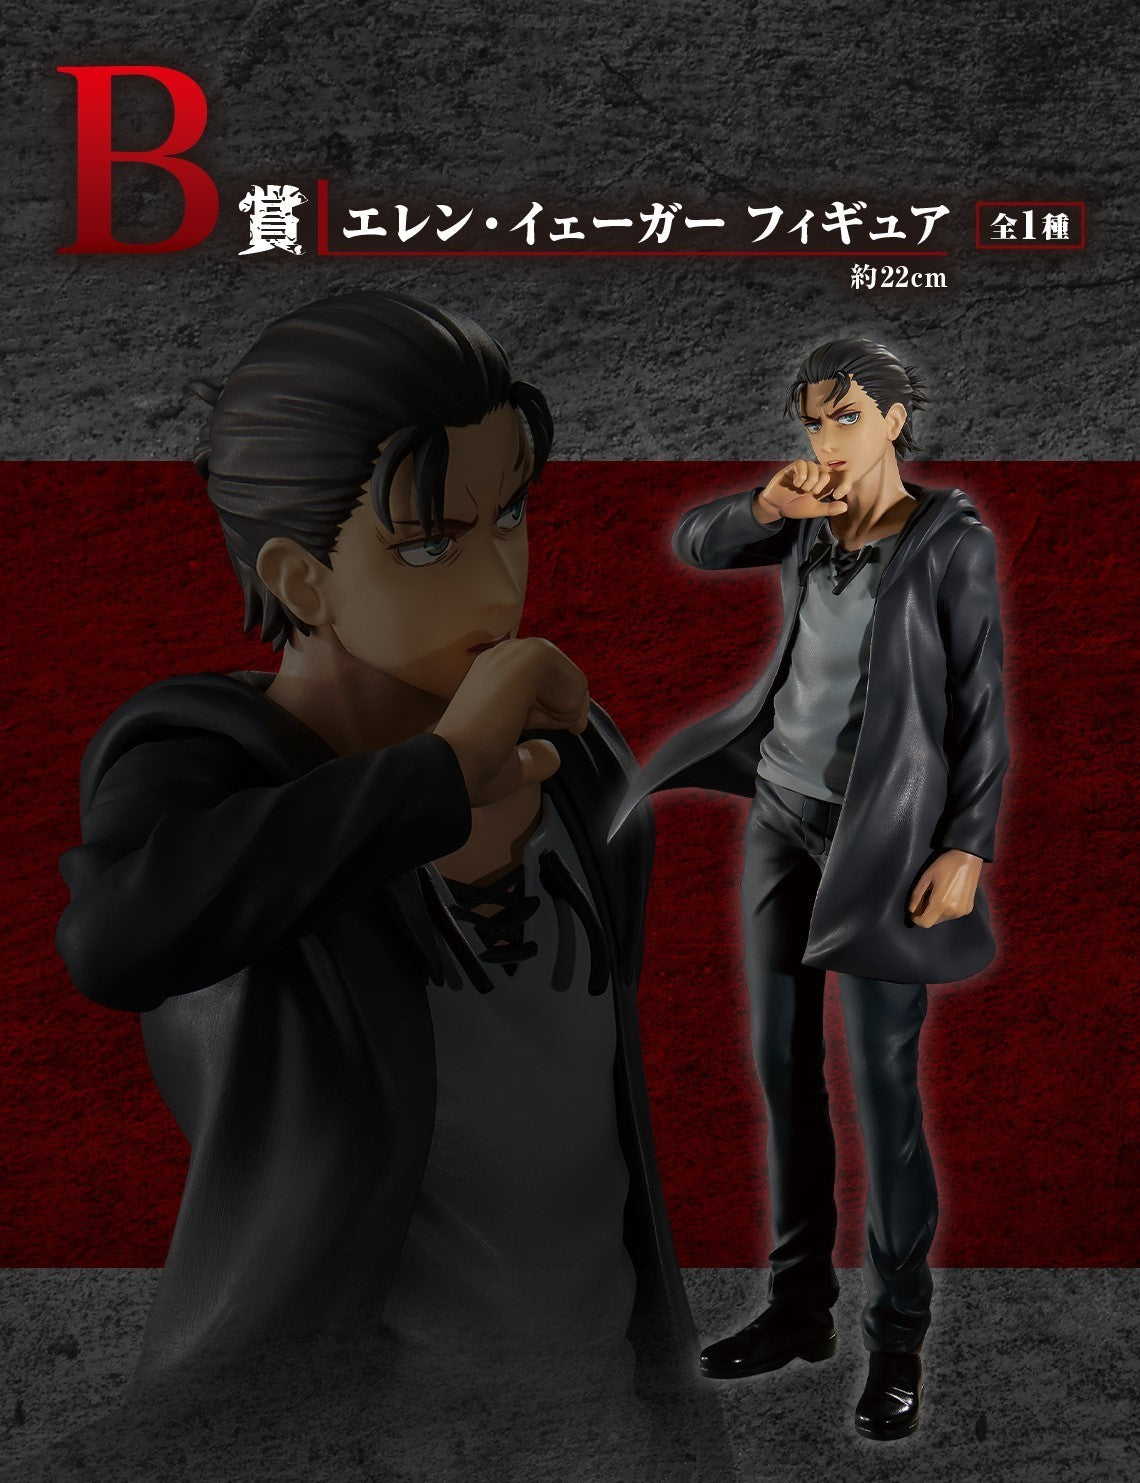 ATTACK ON TITAN FIGURE ICHIBAN KUJI - IN SEARCH OF FREEDOM - PRIZE B - EREN YEAGER